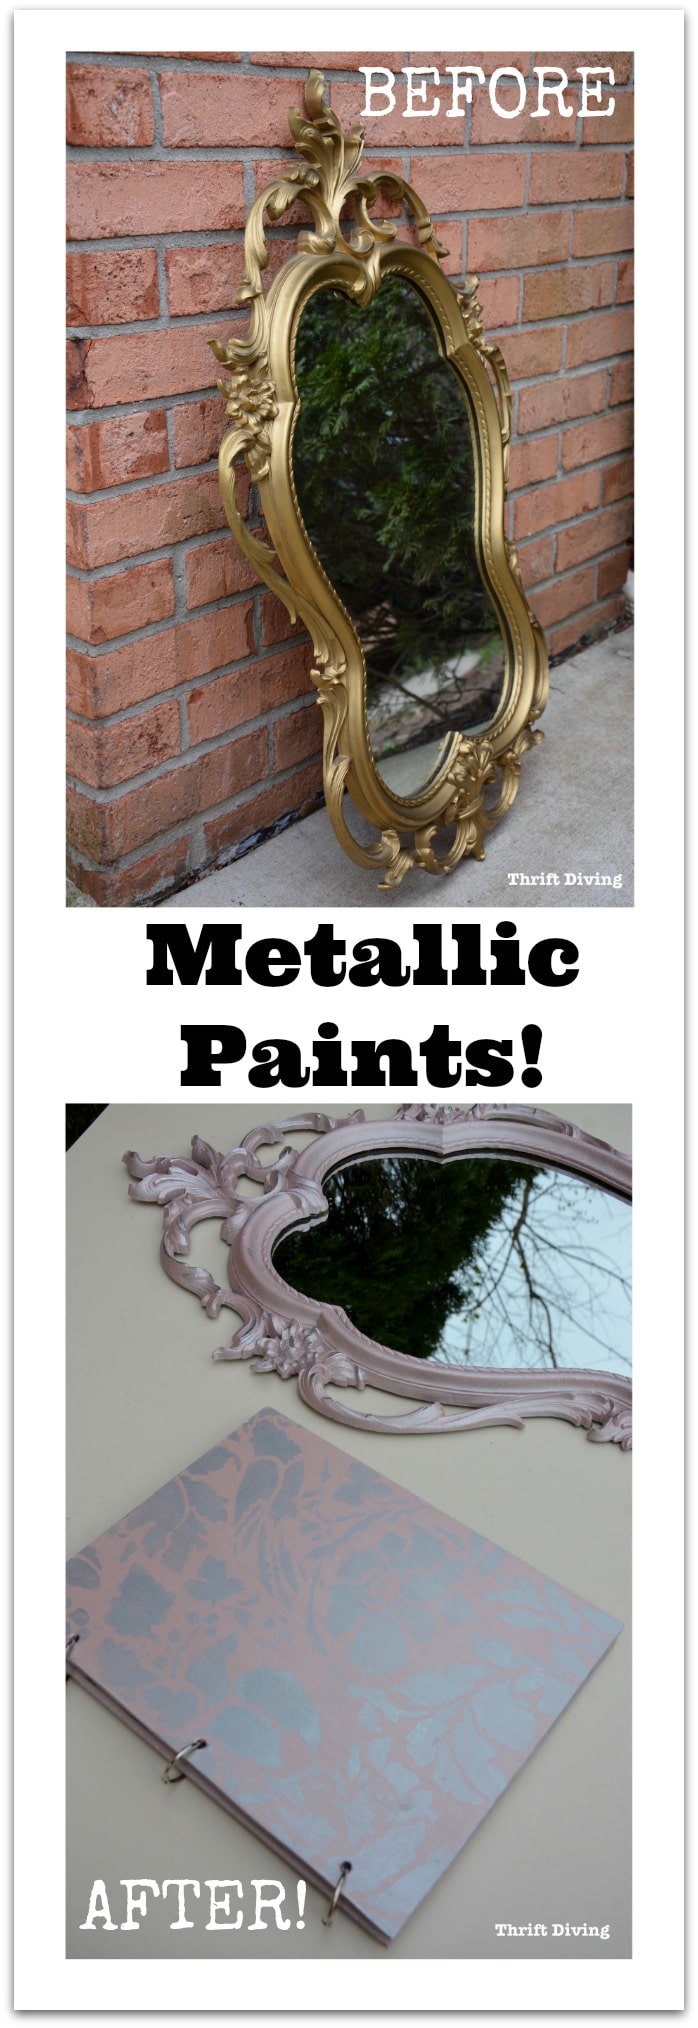 Having fun with metallic paints to transform mirrors and DIY wooden journals - Thrift Diving